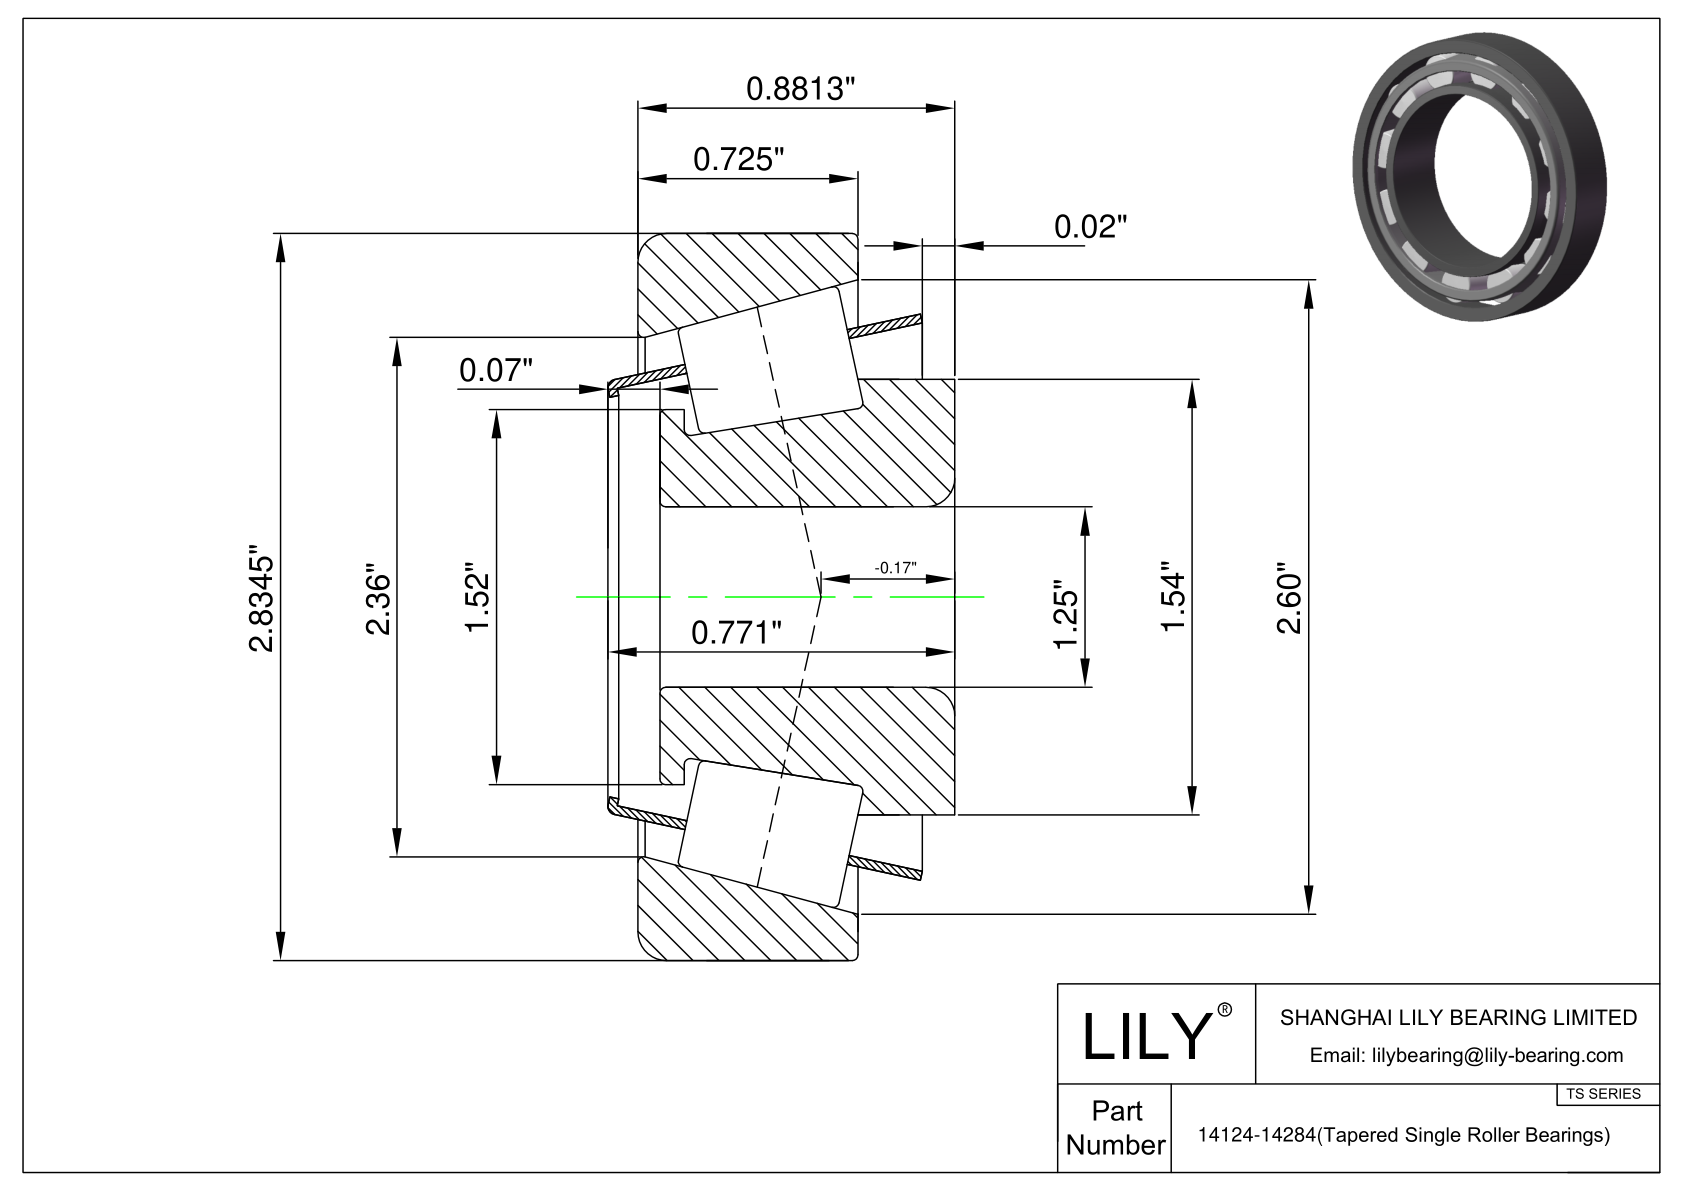 14124-14284 TS (Tapered Single Roller Bearings) (Imperial) cad drawing